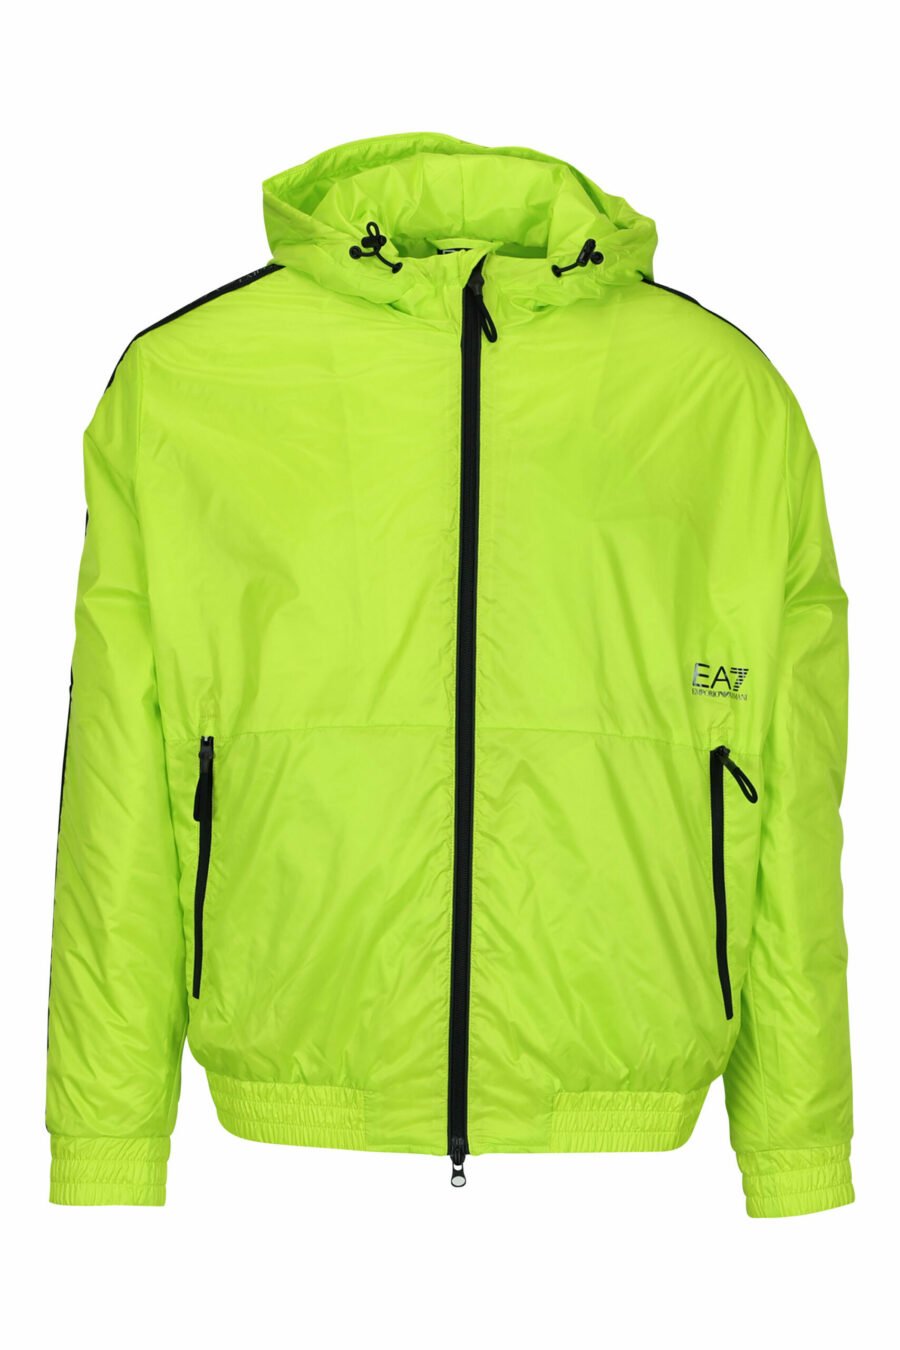 Chaqueta verde lima impermeable con capucha lineas blancas laterales y logo "lux identity" - 8057970709060 scaled